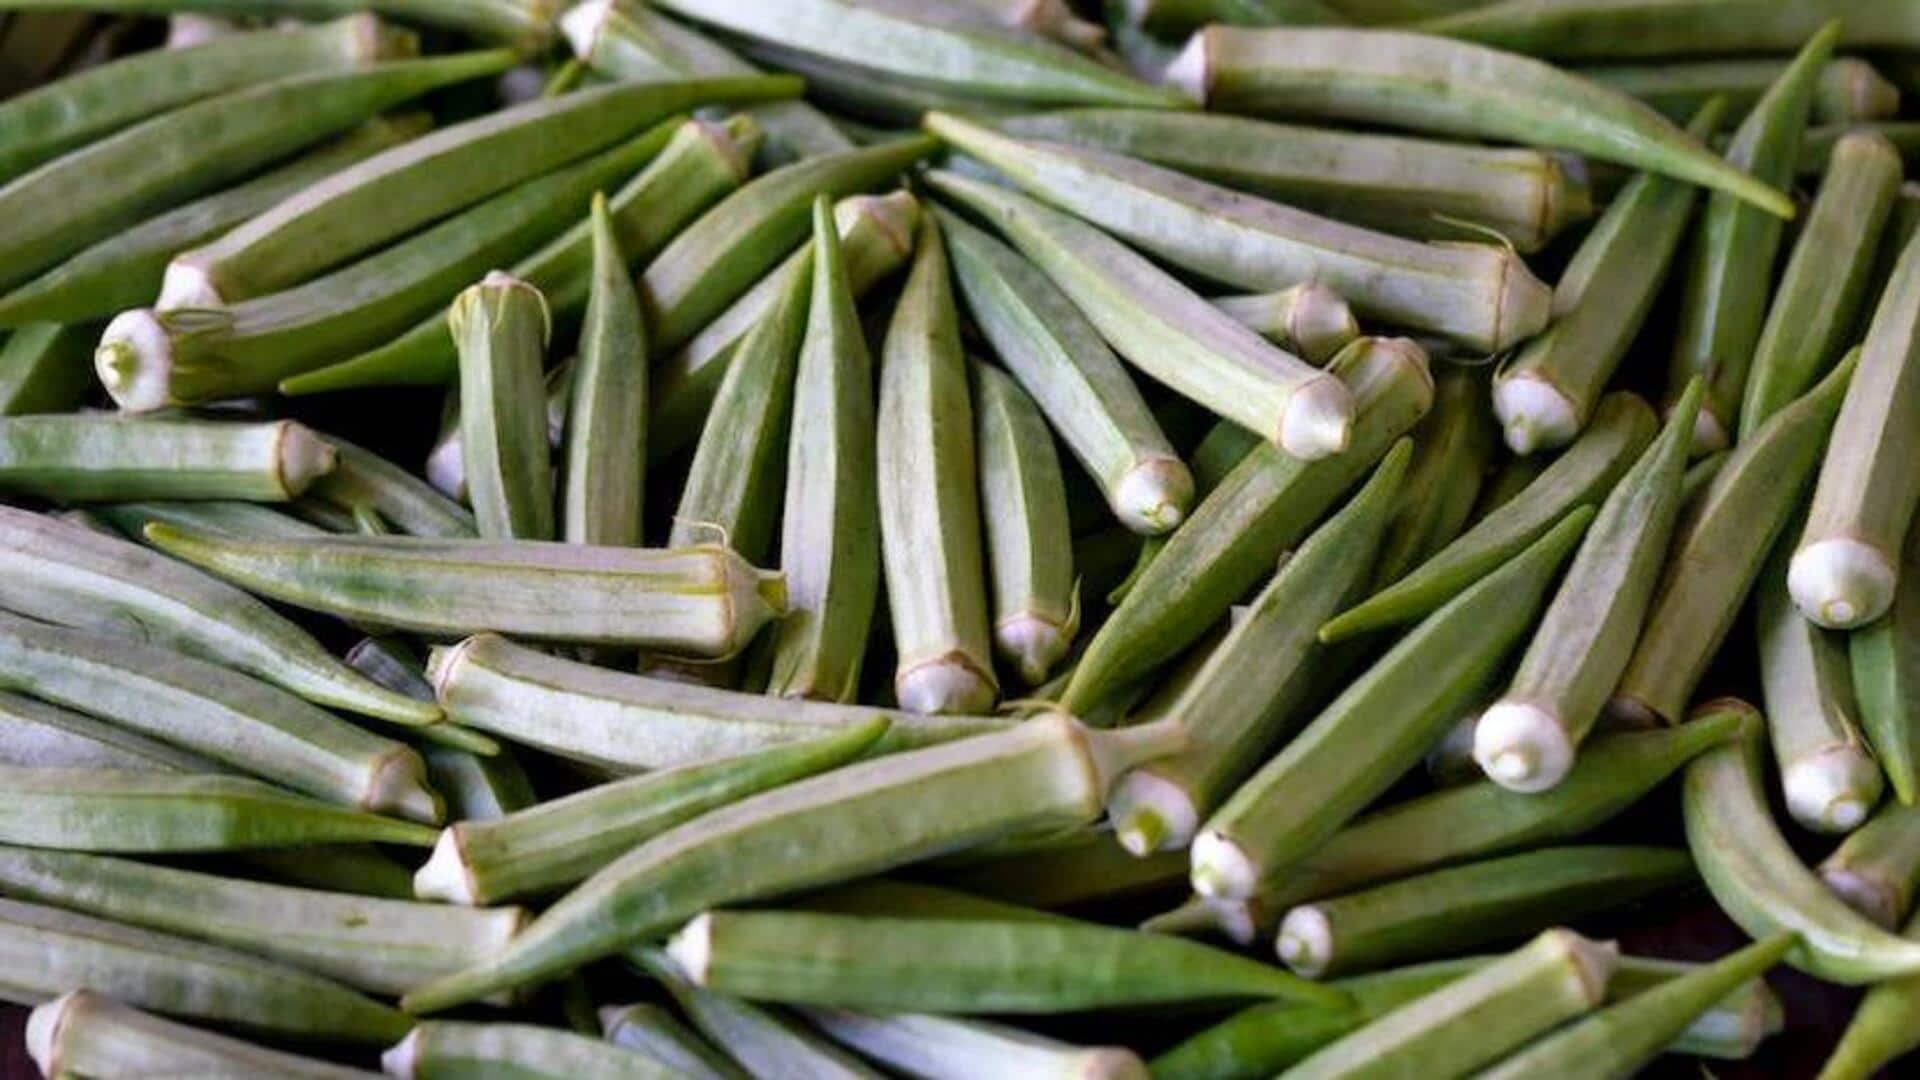 Here is why you should eat okra regularly